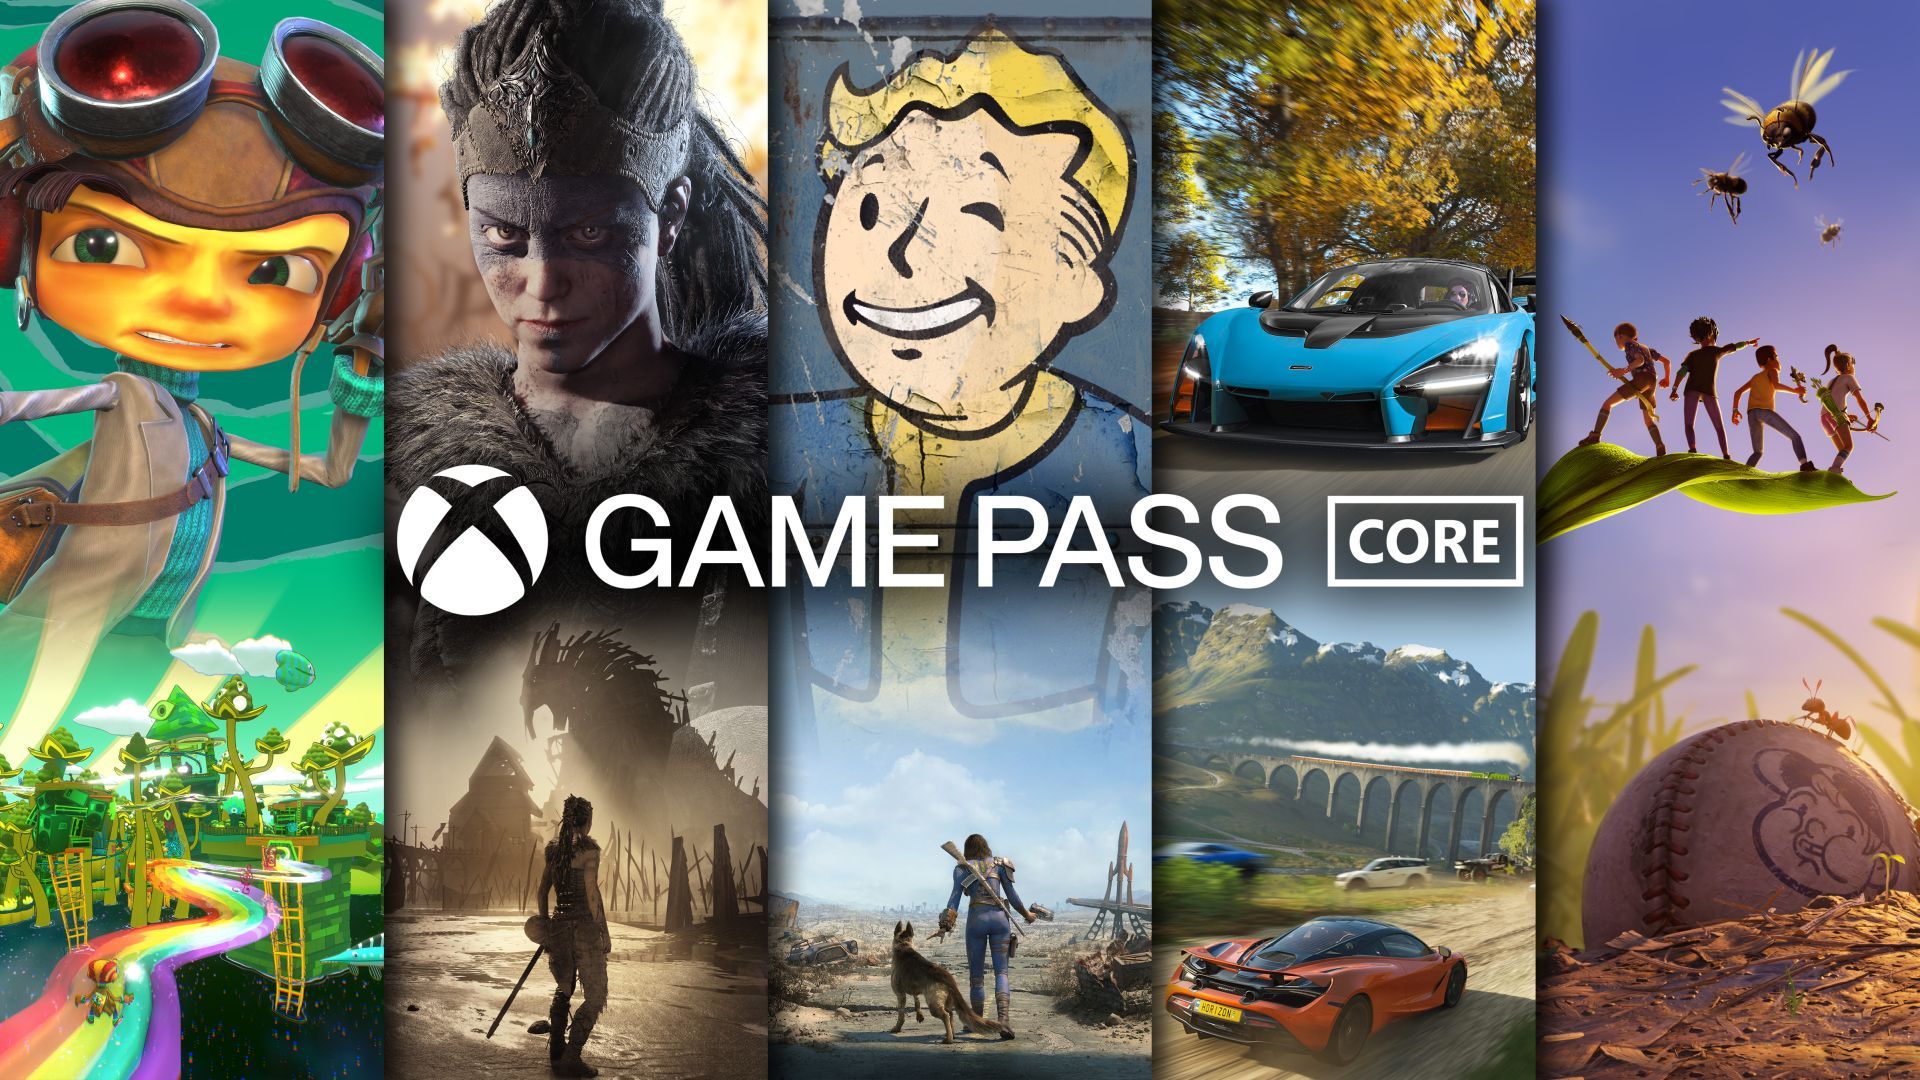 EA Play now available on consoles with Game Pass Ultimate - 9to5Toys